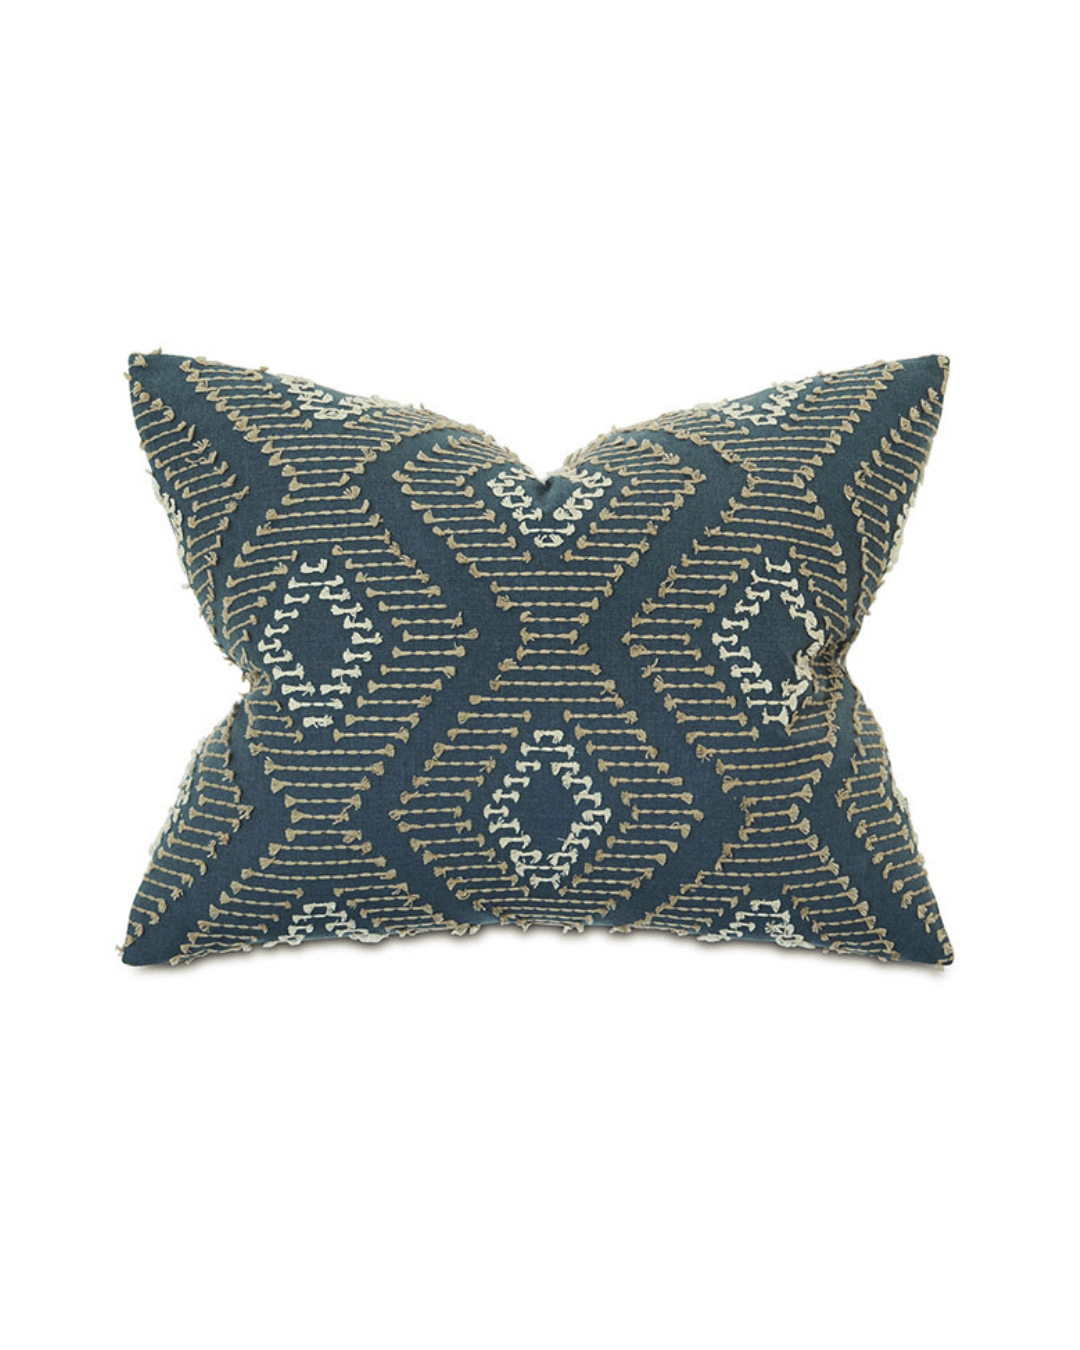 Sentence with replaced product: Diamond standard sham in Arizona style with a geometric pattern in navy blue and metallic gold, photographed against a white background. Brand Eastern Accents.